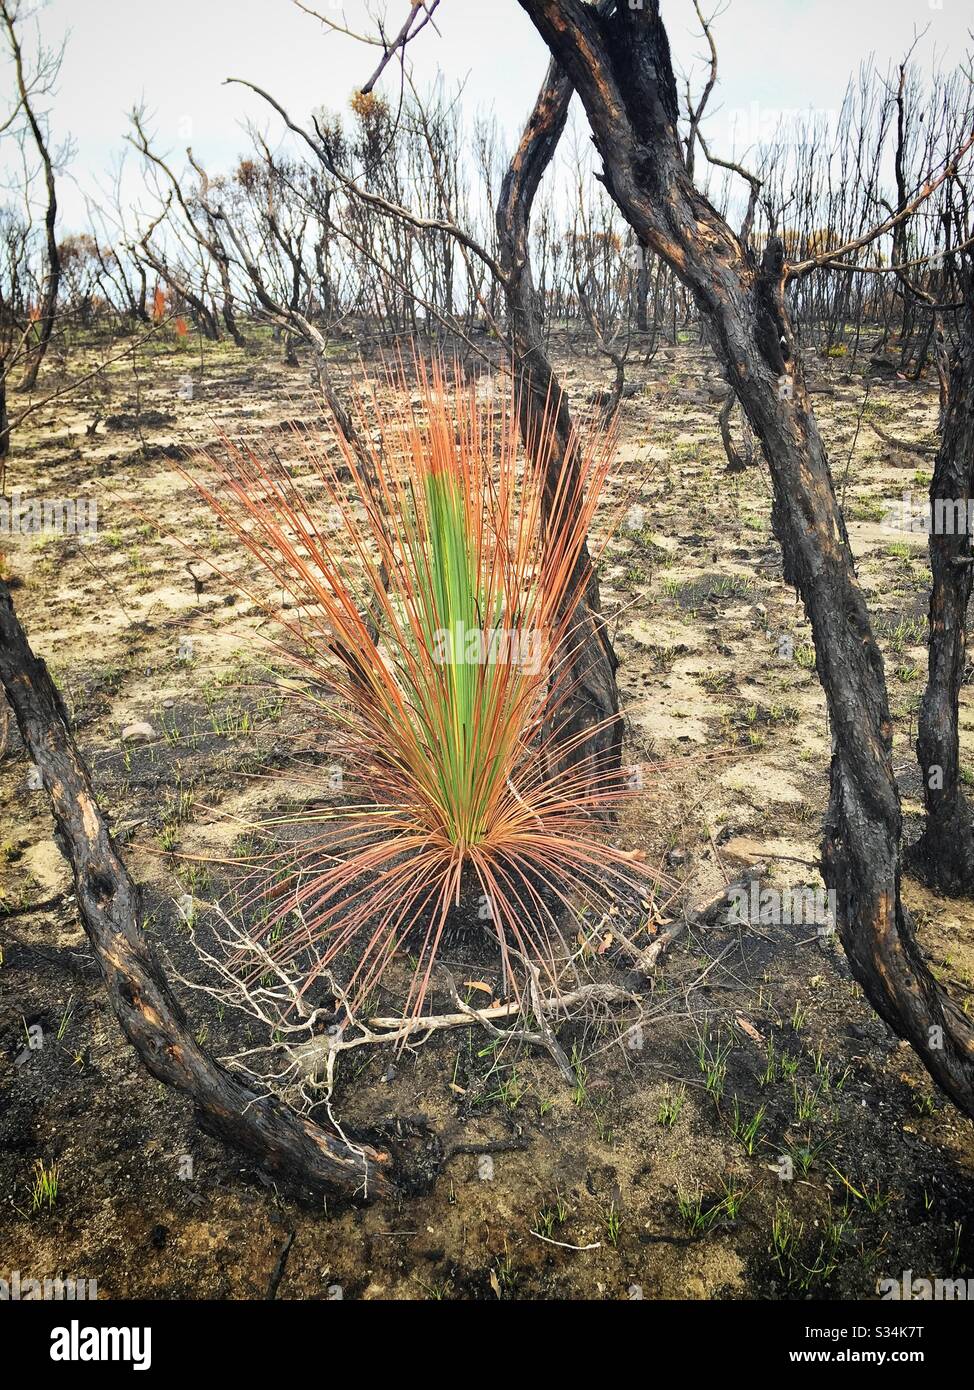 Regrowth on a Grass Tree about one month after being burned by bushfire, Hat Hill, Blue Mountains National Park, NSW, Australia, January 2020 Stock Photo